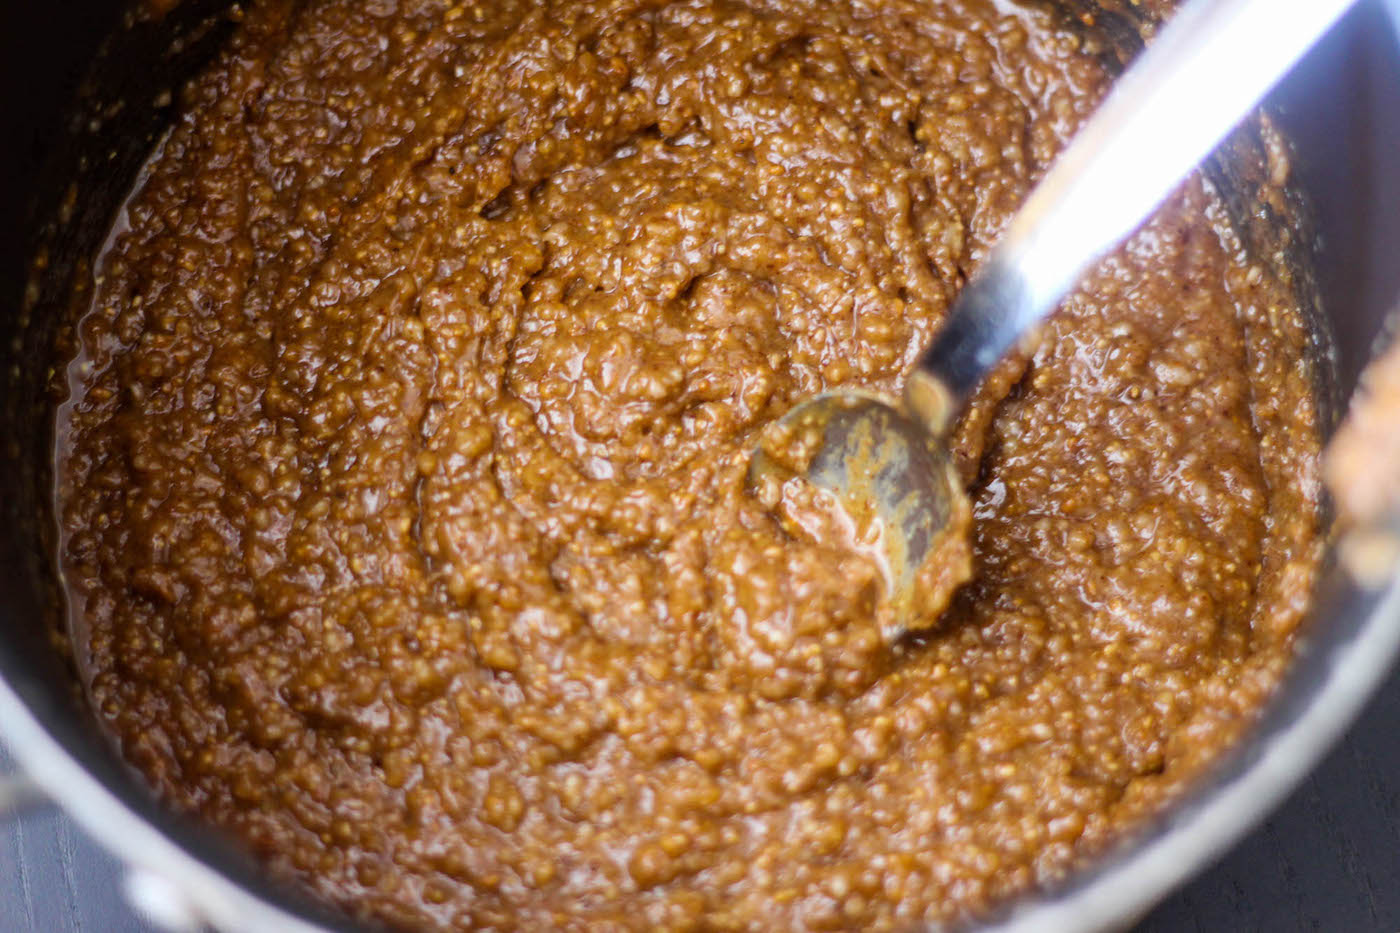 Stirring almond butter into the energy bar recipe